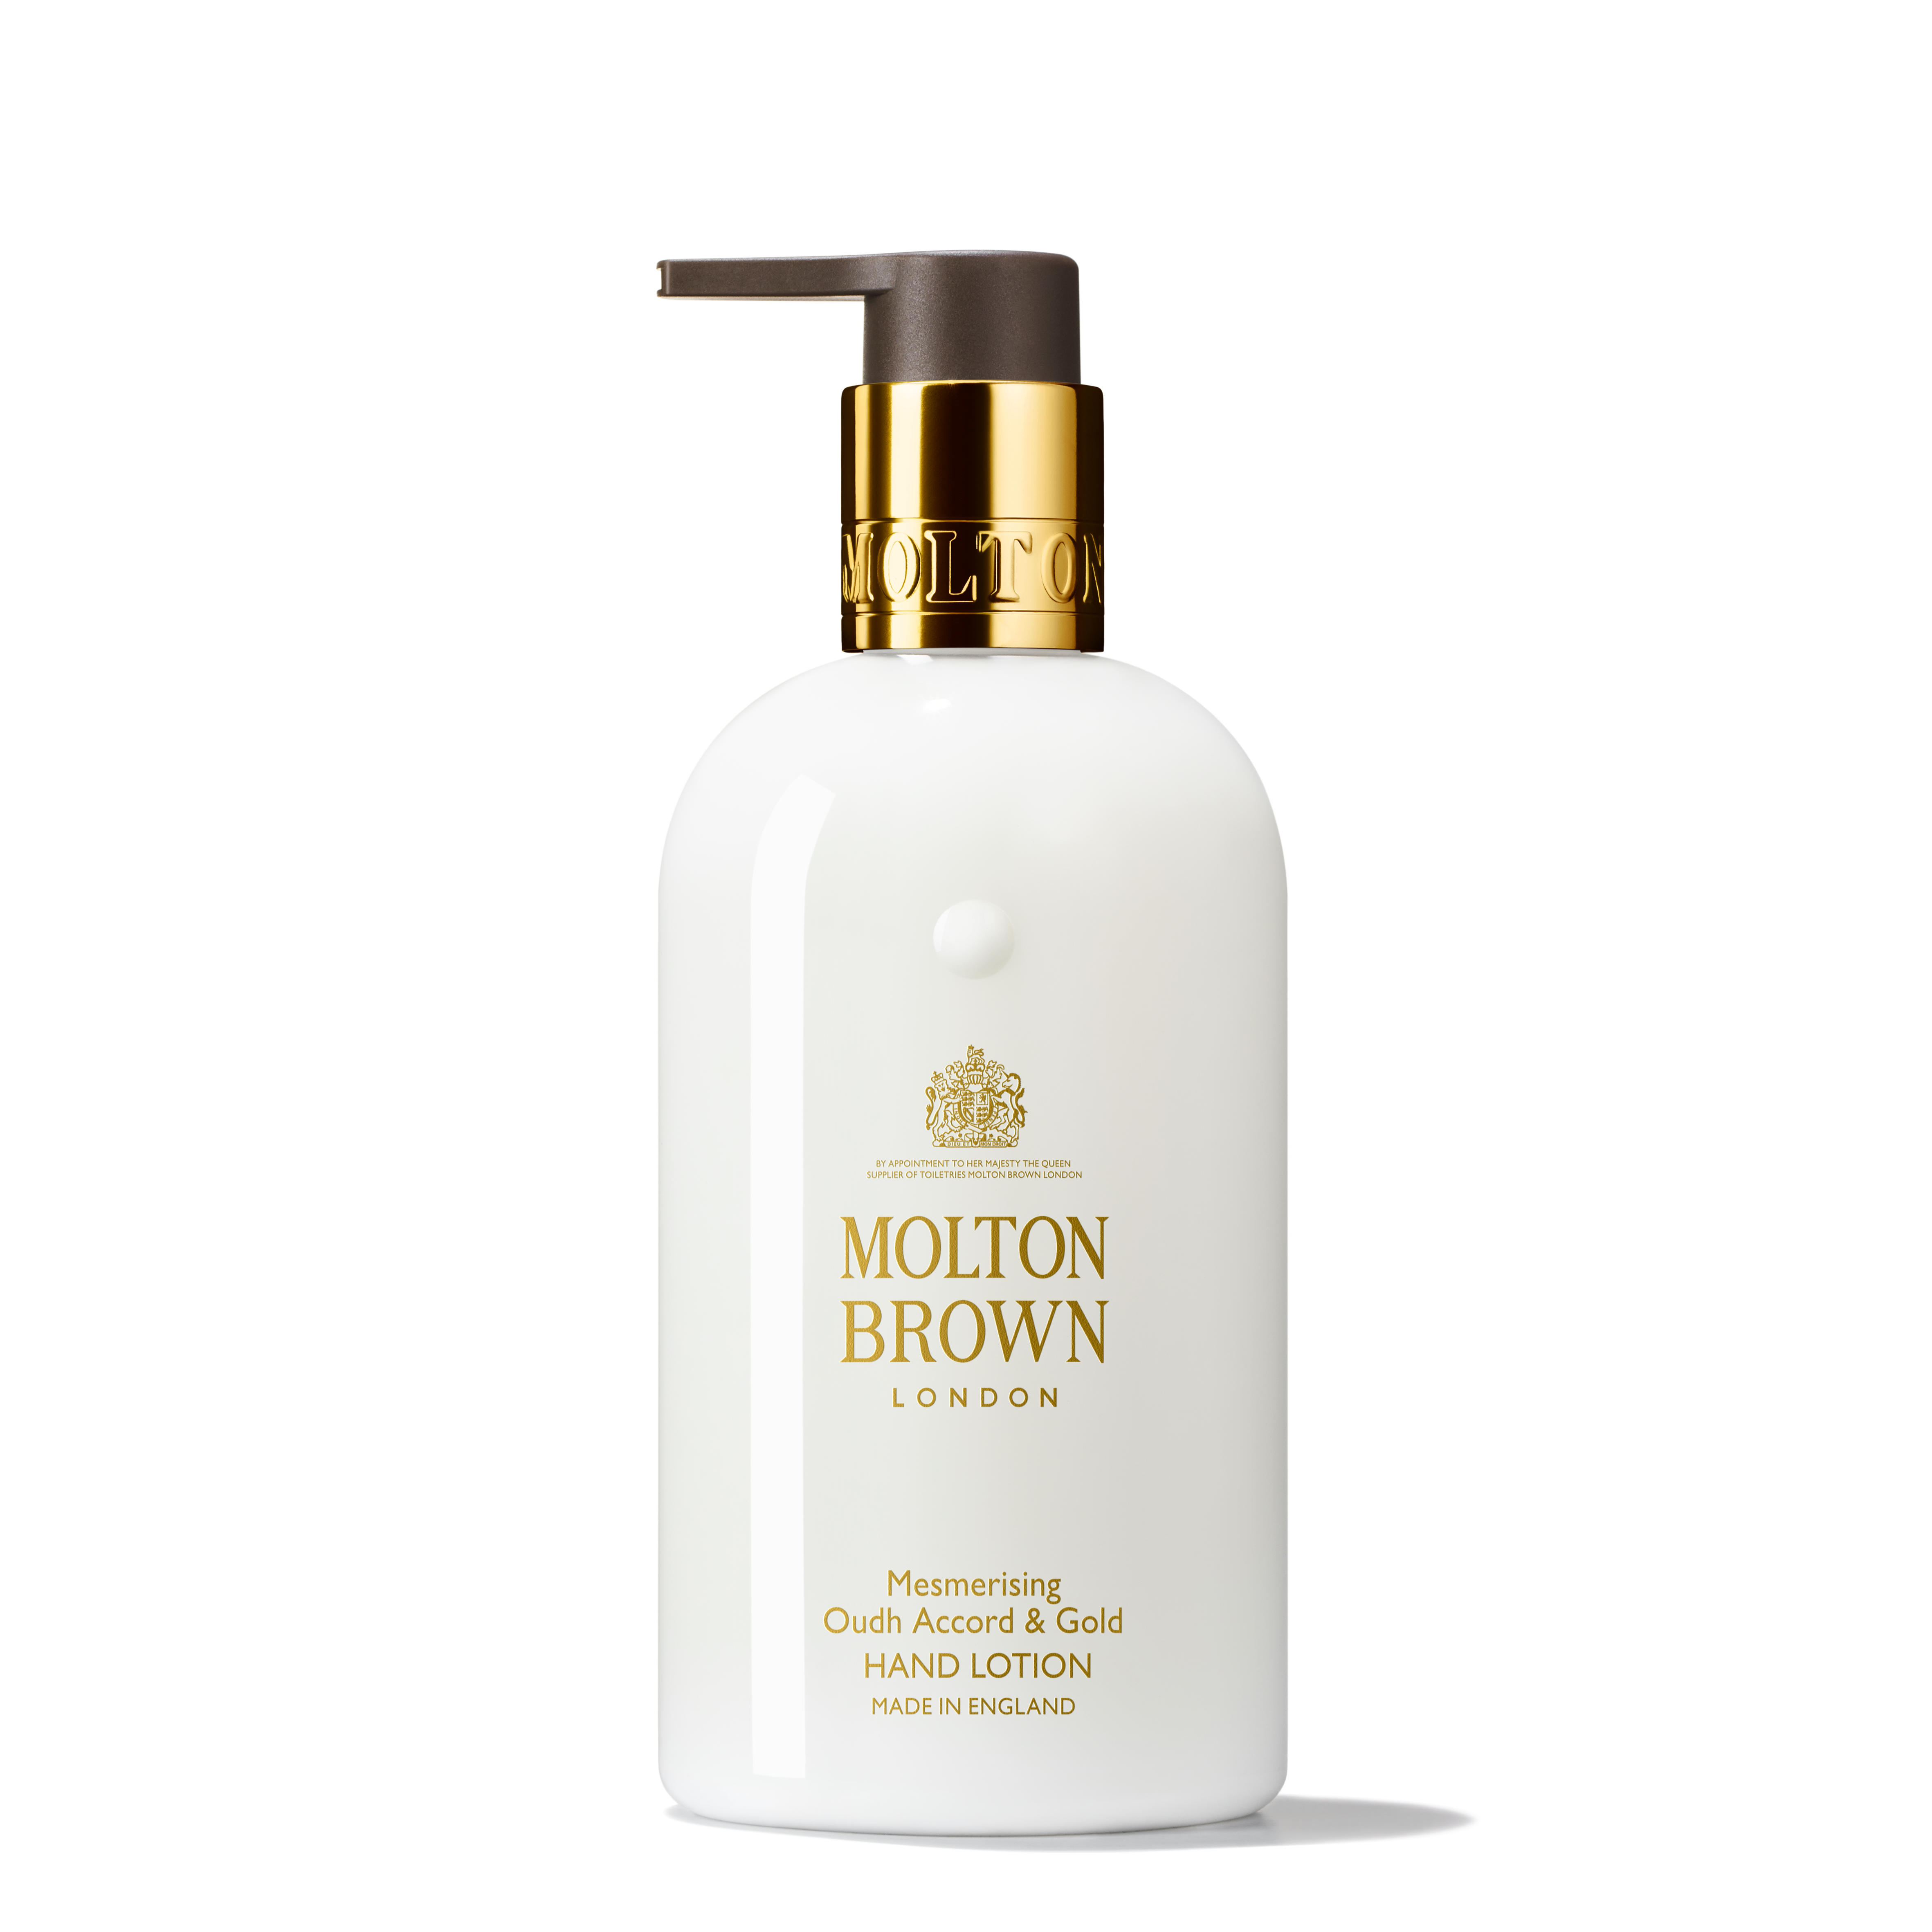 Mesmerising Oudh Accord & Gold Hand Lotion